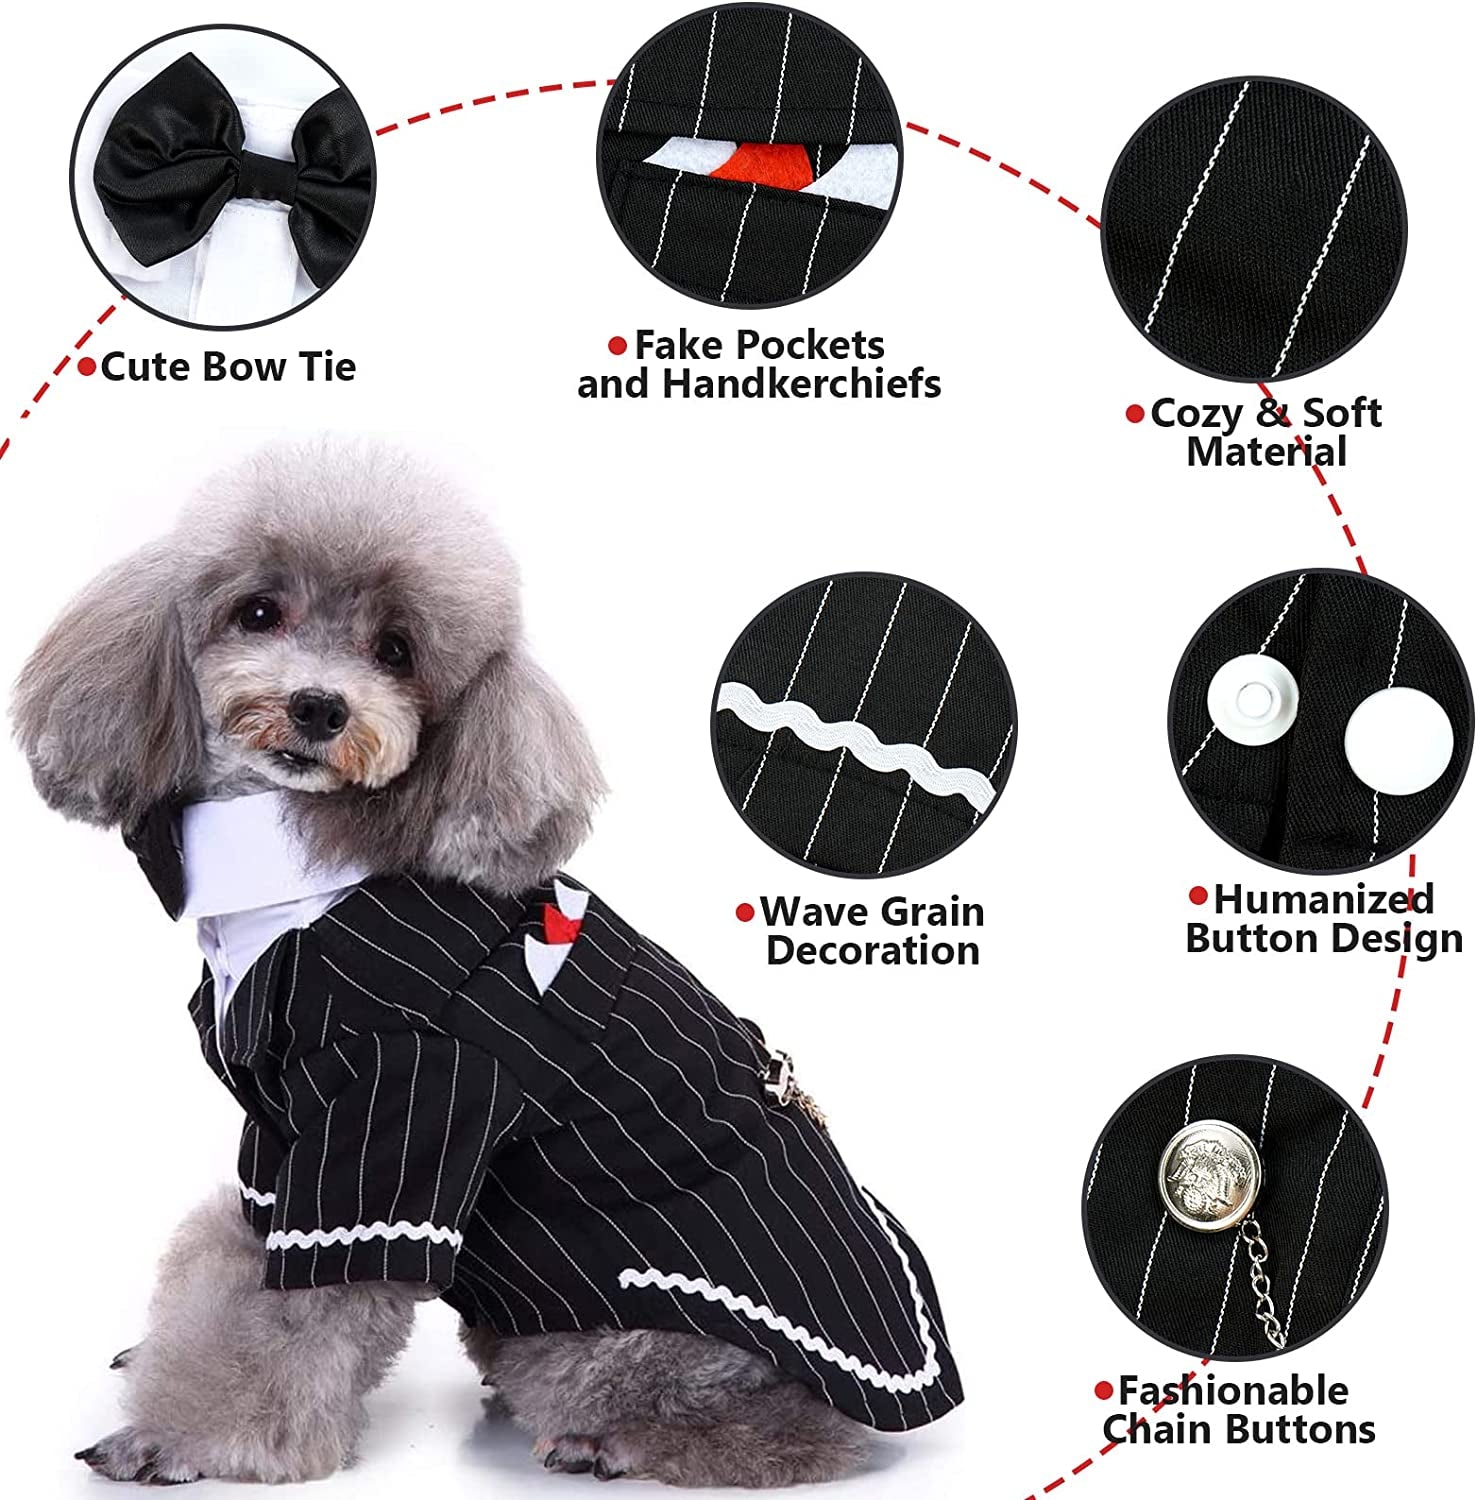 Dog Black Suit Costume, Pet Halloween Costume with Bow Tie, Formal Boston Tuxedo Shirt for Small Medium Large Puppy Dogs, Cat Dark Bride Costume Prince Wedding Clothes